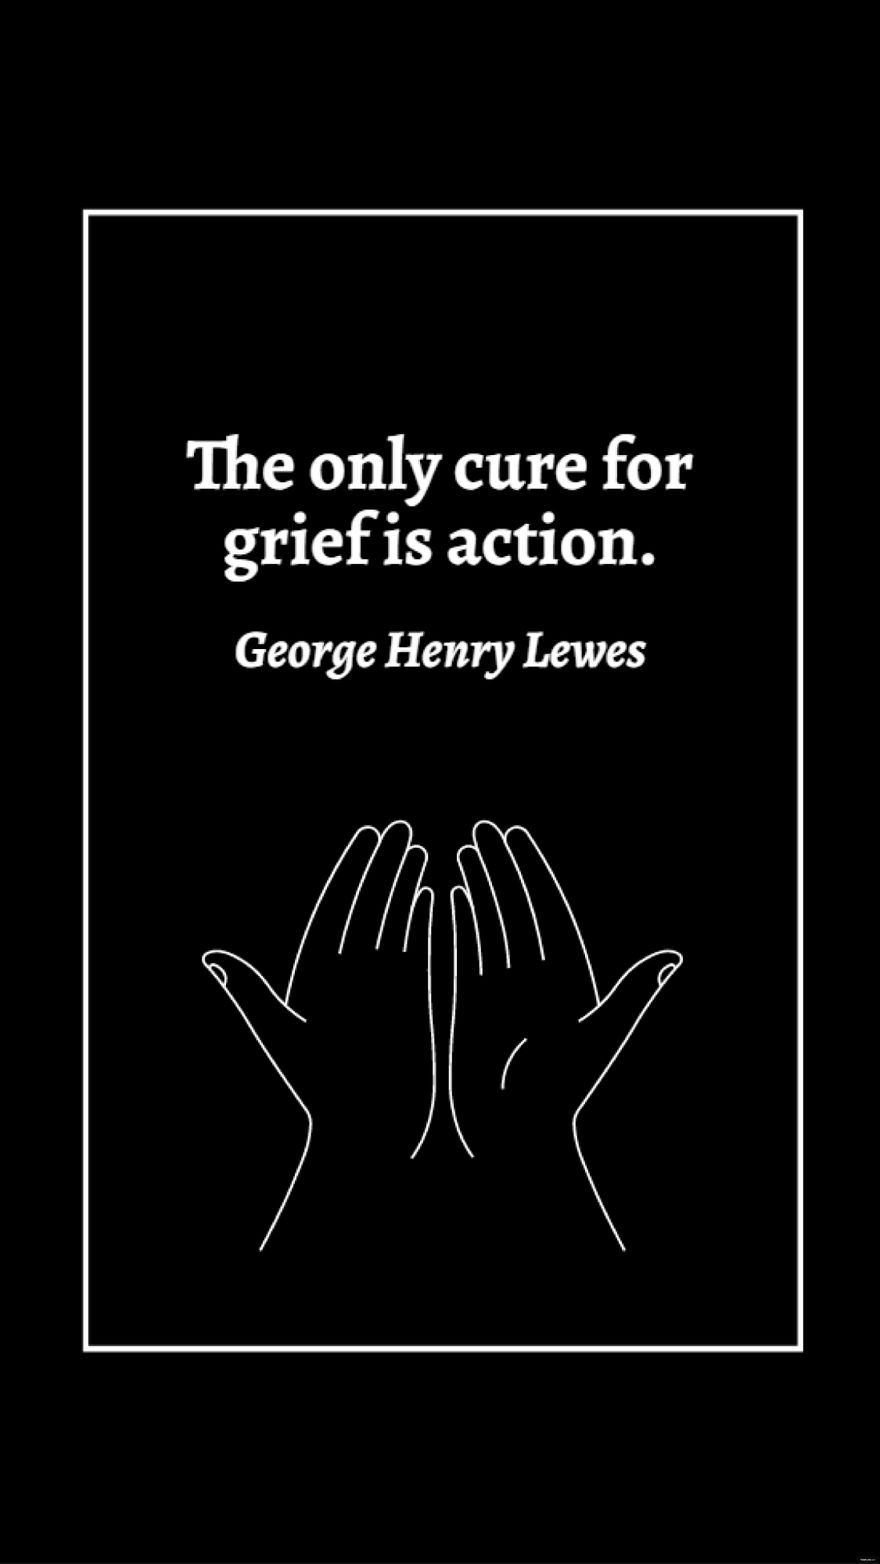 Free George Henry Lewes - The only cure for grief is action. in JPG